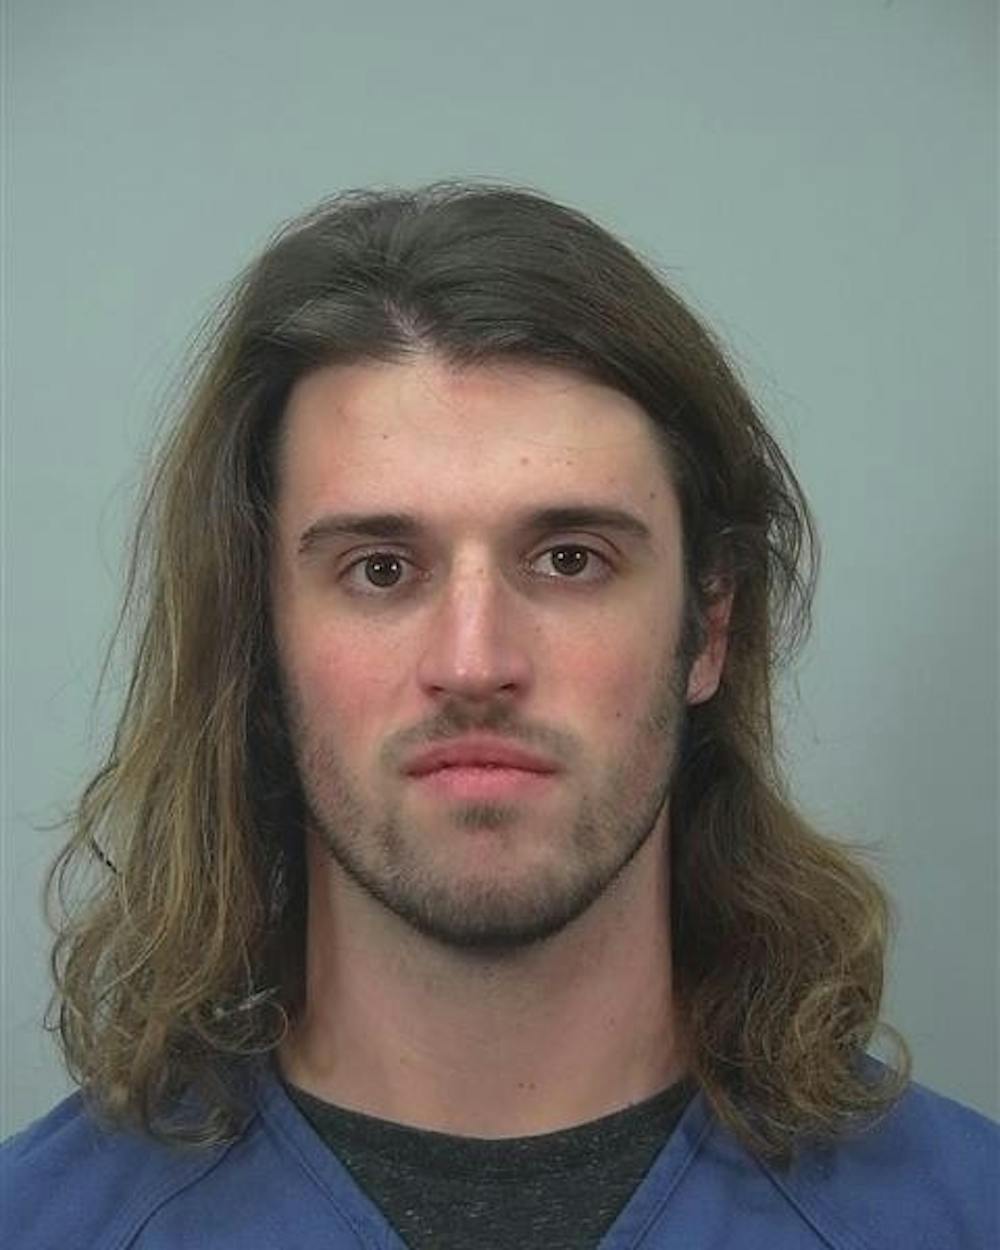 Expelled UW-Madison student Alec Cook is facing another felony charge, in sexual assault cases now involving eleven women, after being accused of cornering a student in a dormitory laundry room in 2014.&nbsp;